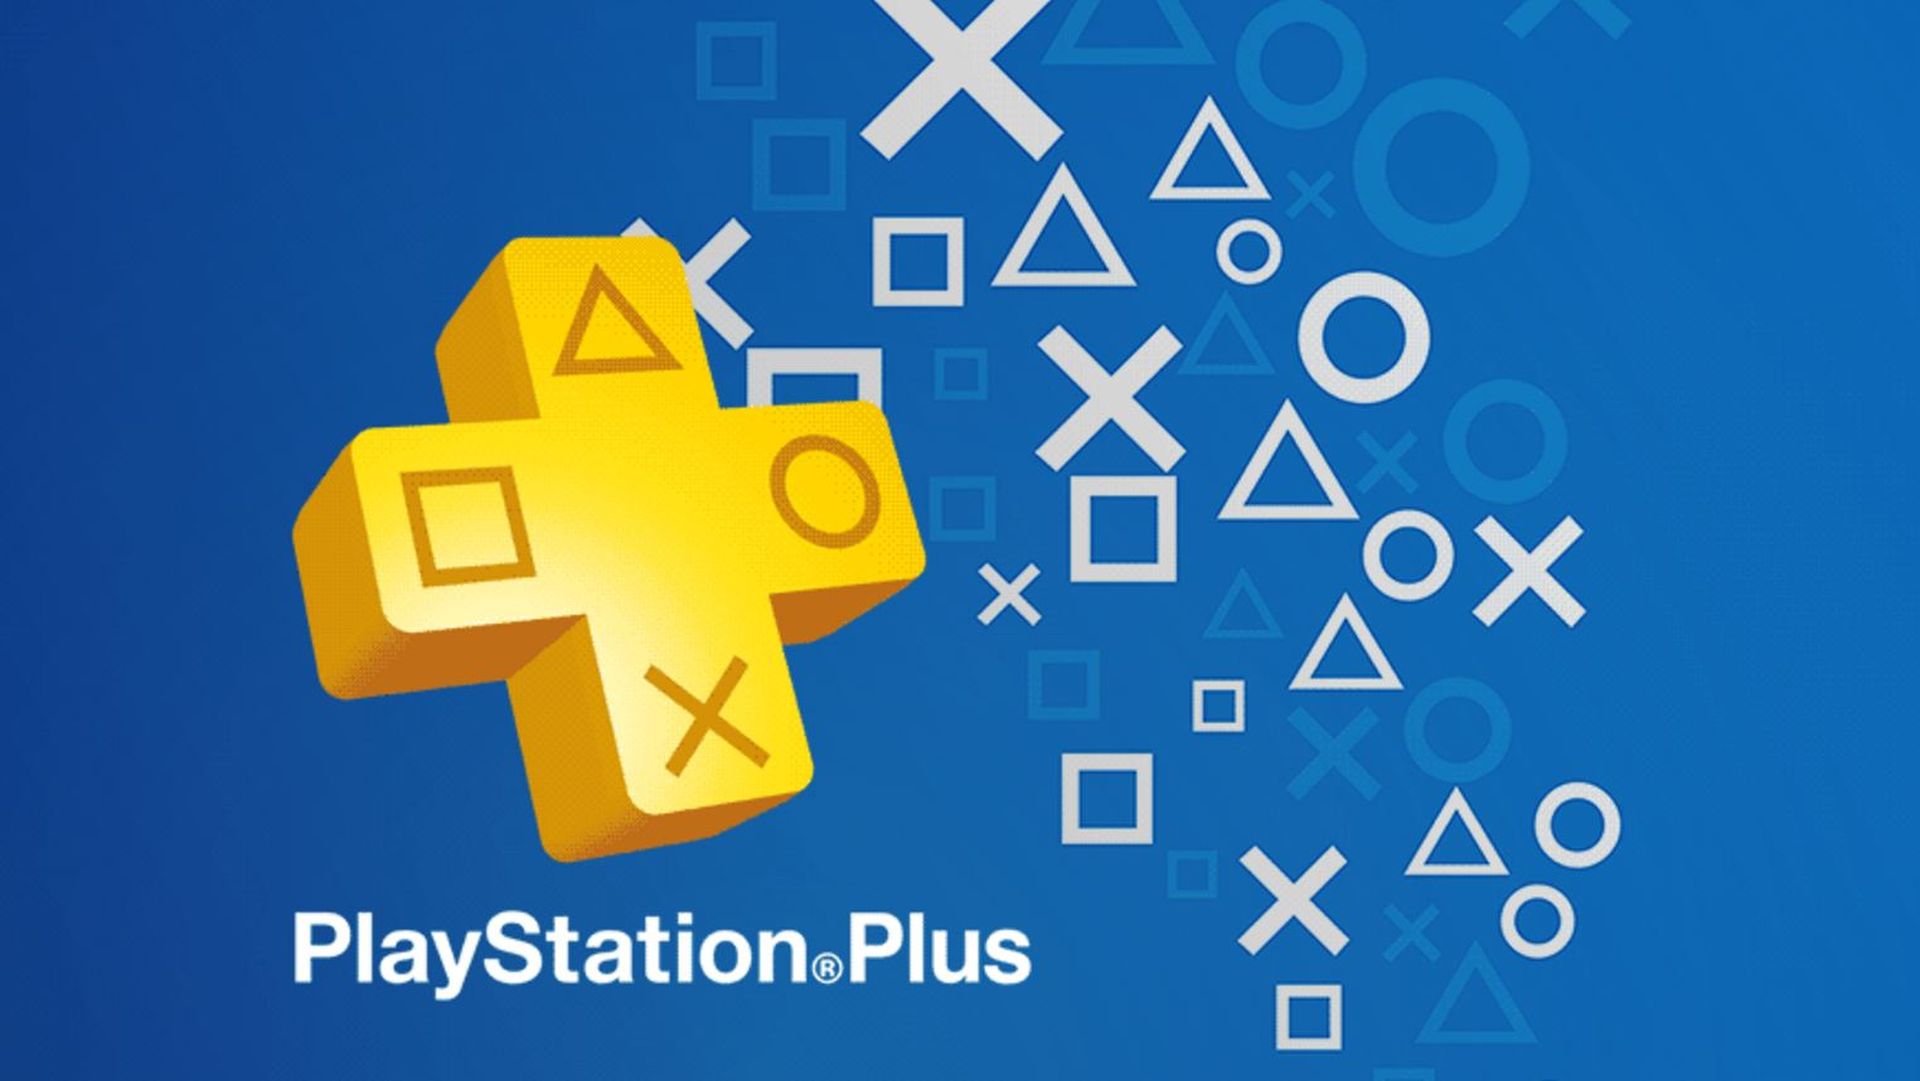 Star Wars Jedi: Fallen Order, Fallout 76, and Axiom Verge 2 have been officially unveiled as the free PS Plus games January 2023. Sony usually announces a...